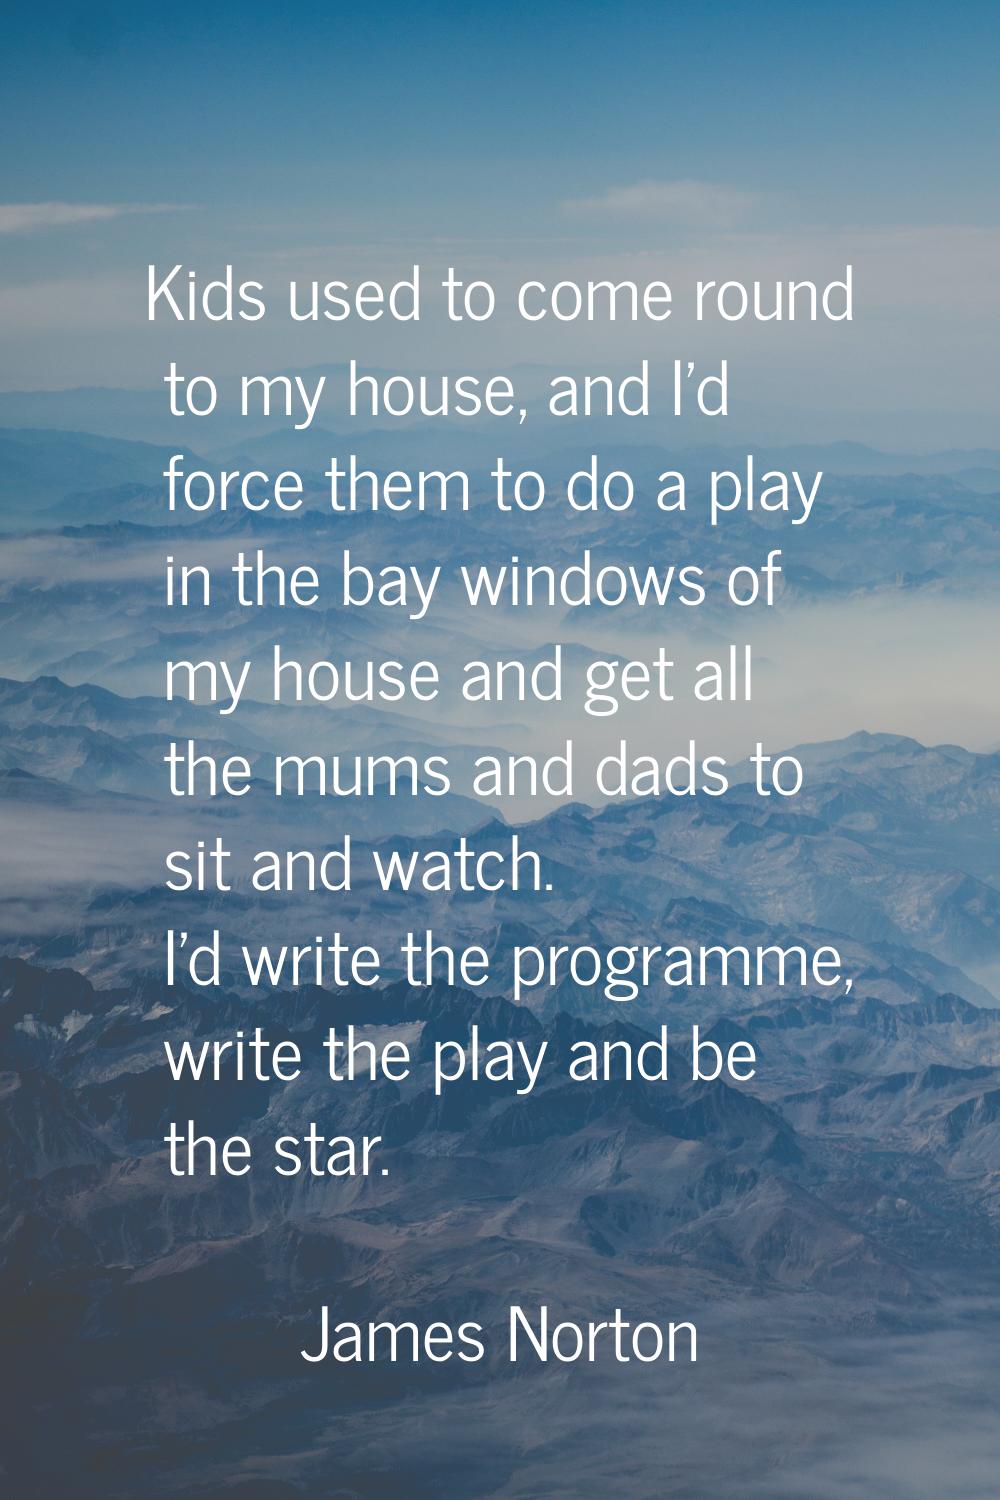 Kids used to come round to my house, and I'd force them to do a play in the bay windows of my house